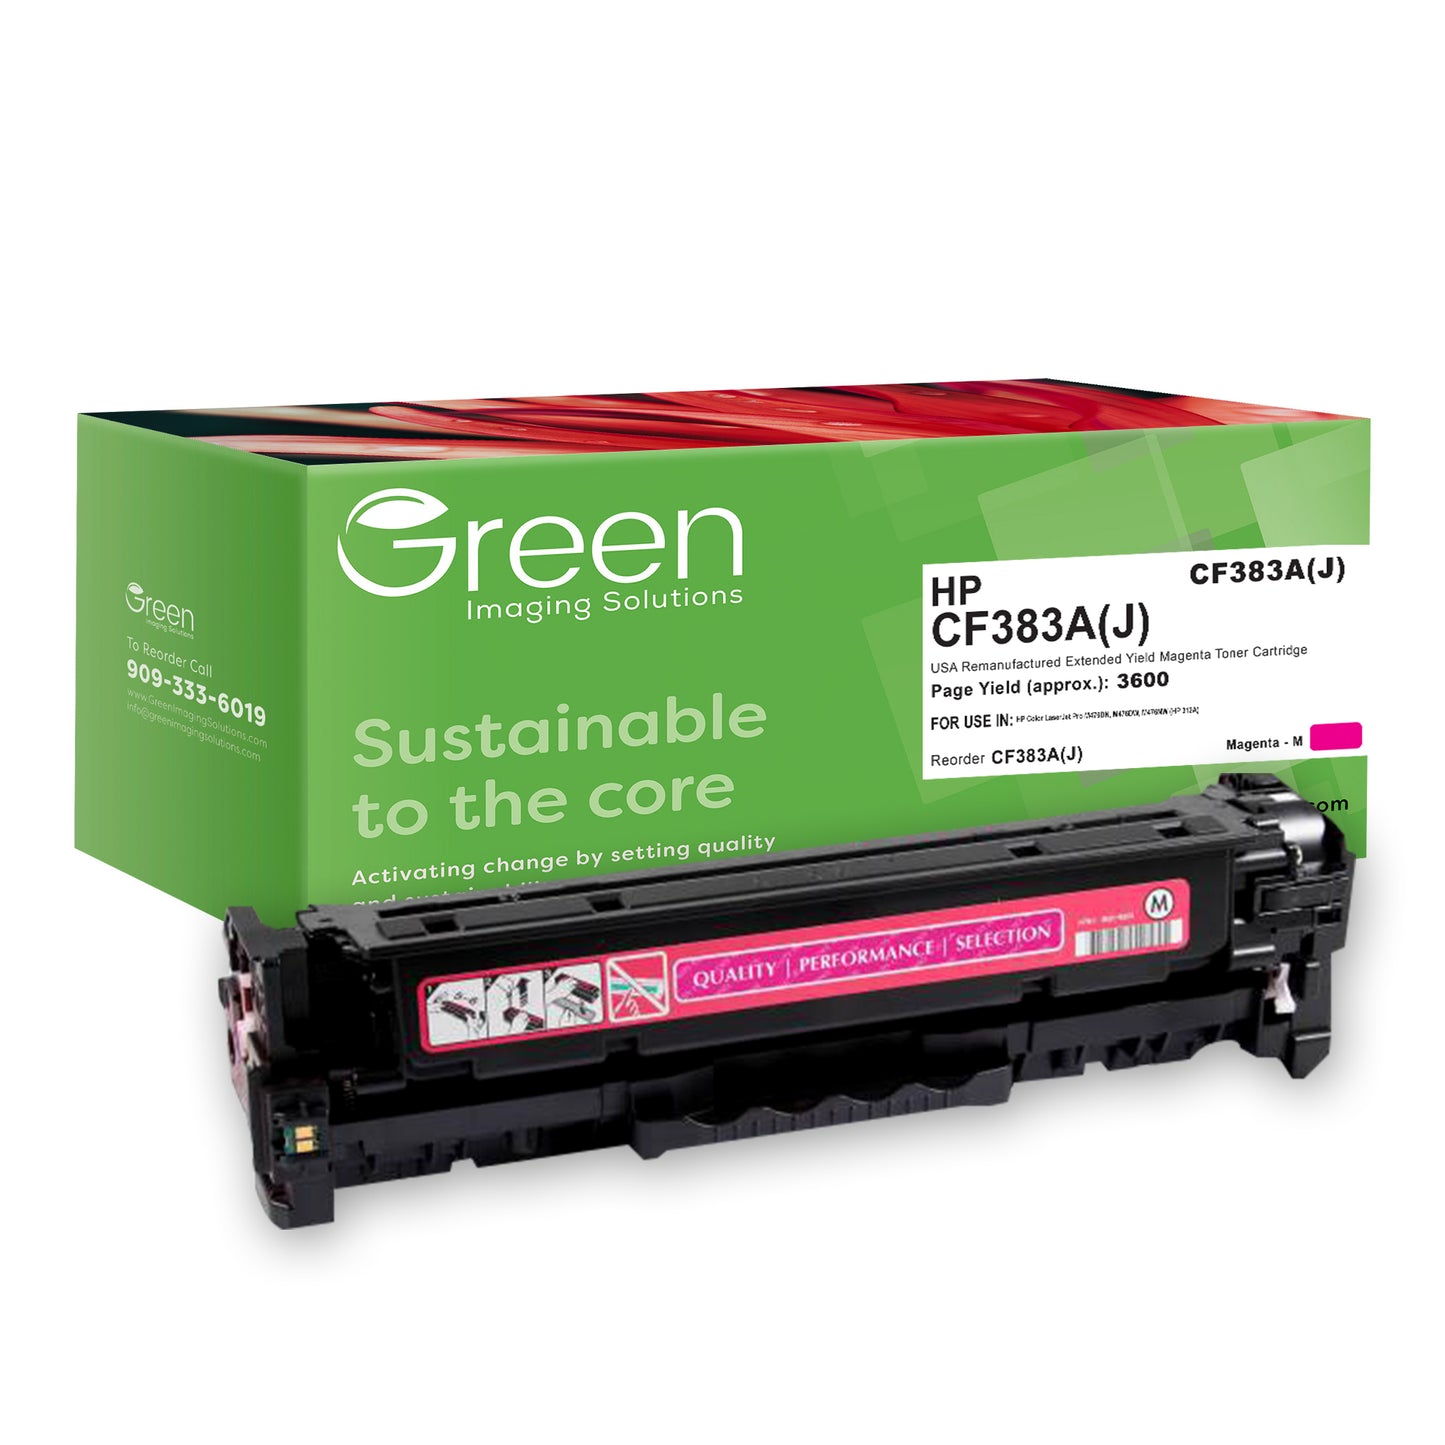 GIS USA Remanufactured Extended Yield Magenta Toner Cartridge for HP CF383A (HP 312A)